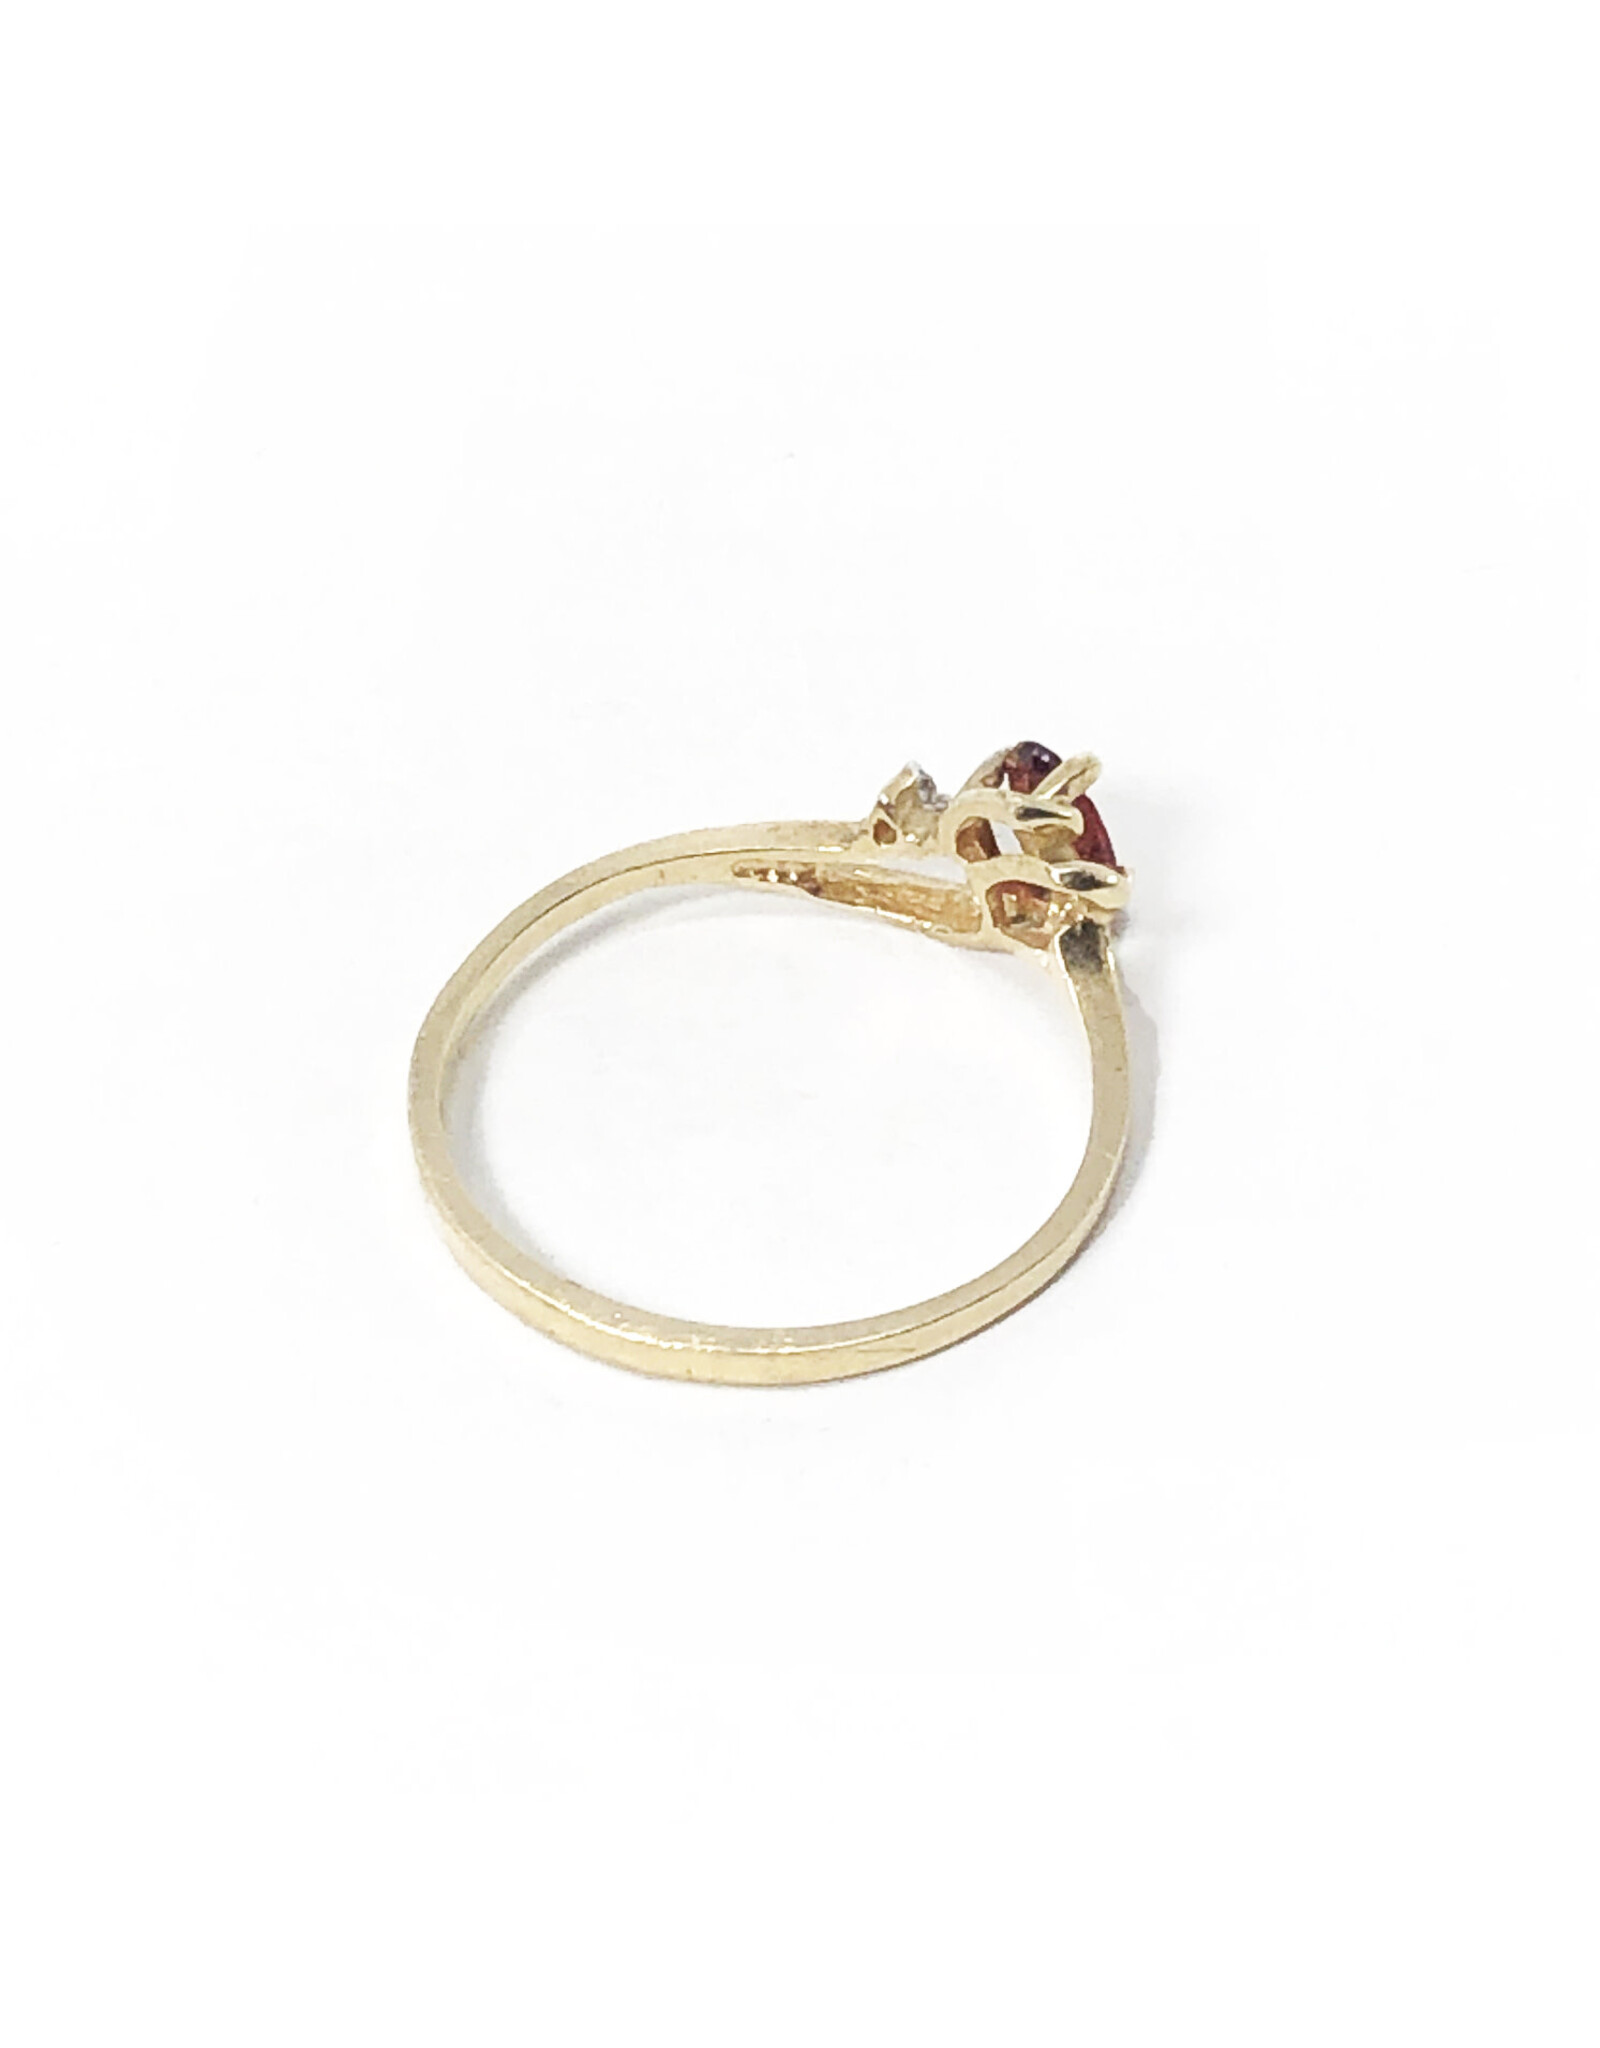 10K Gold Ring with Rubellite and Small Colorless Gem